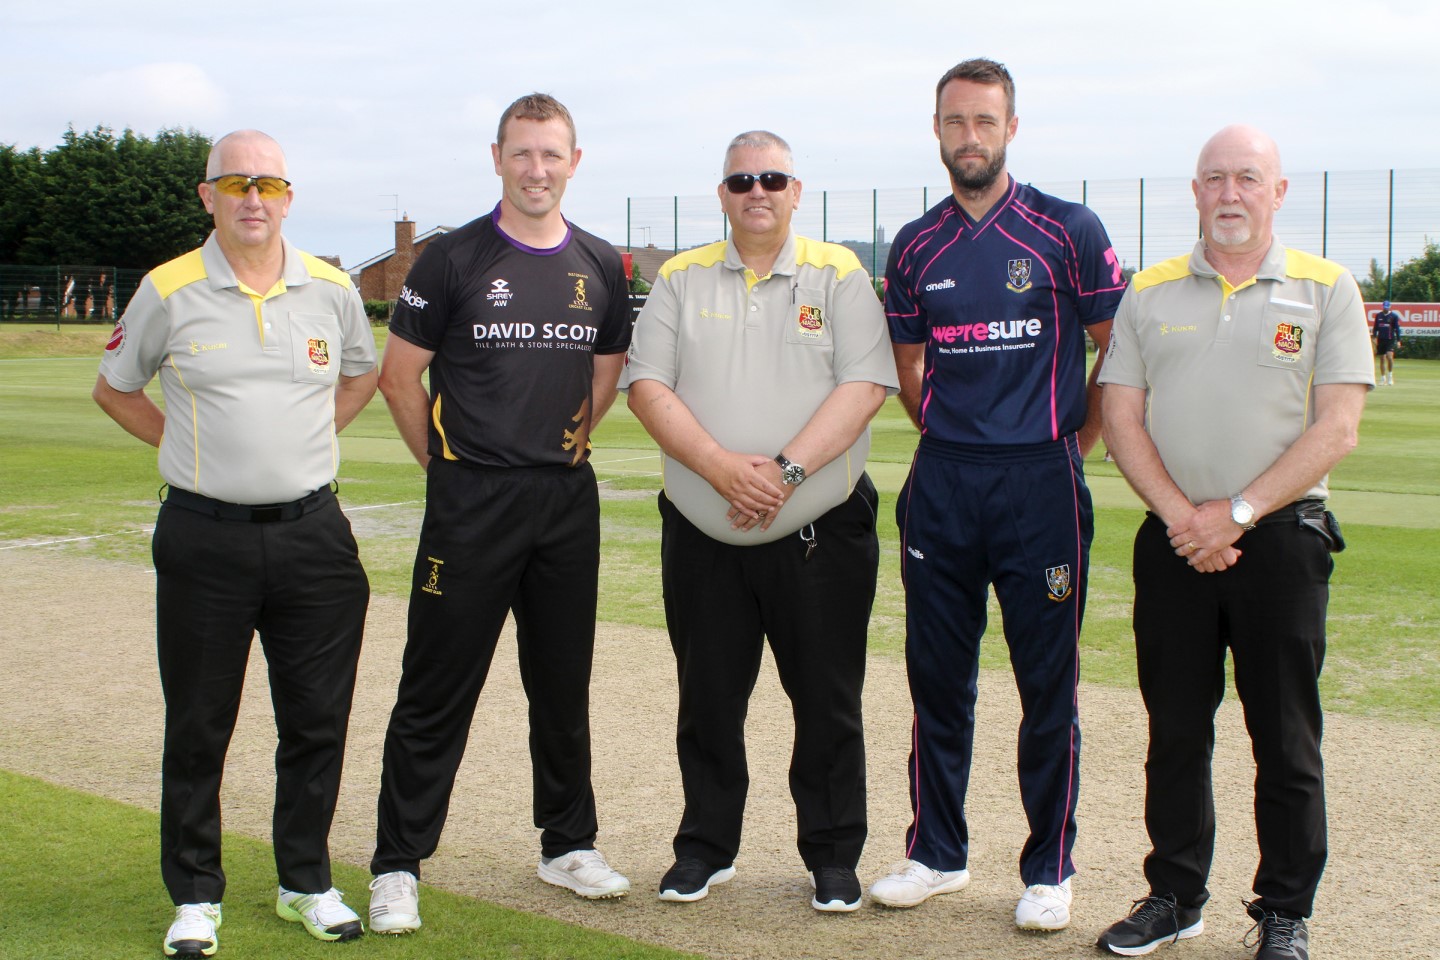 Captains and Umpires at the toss